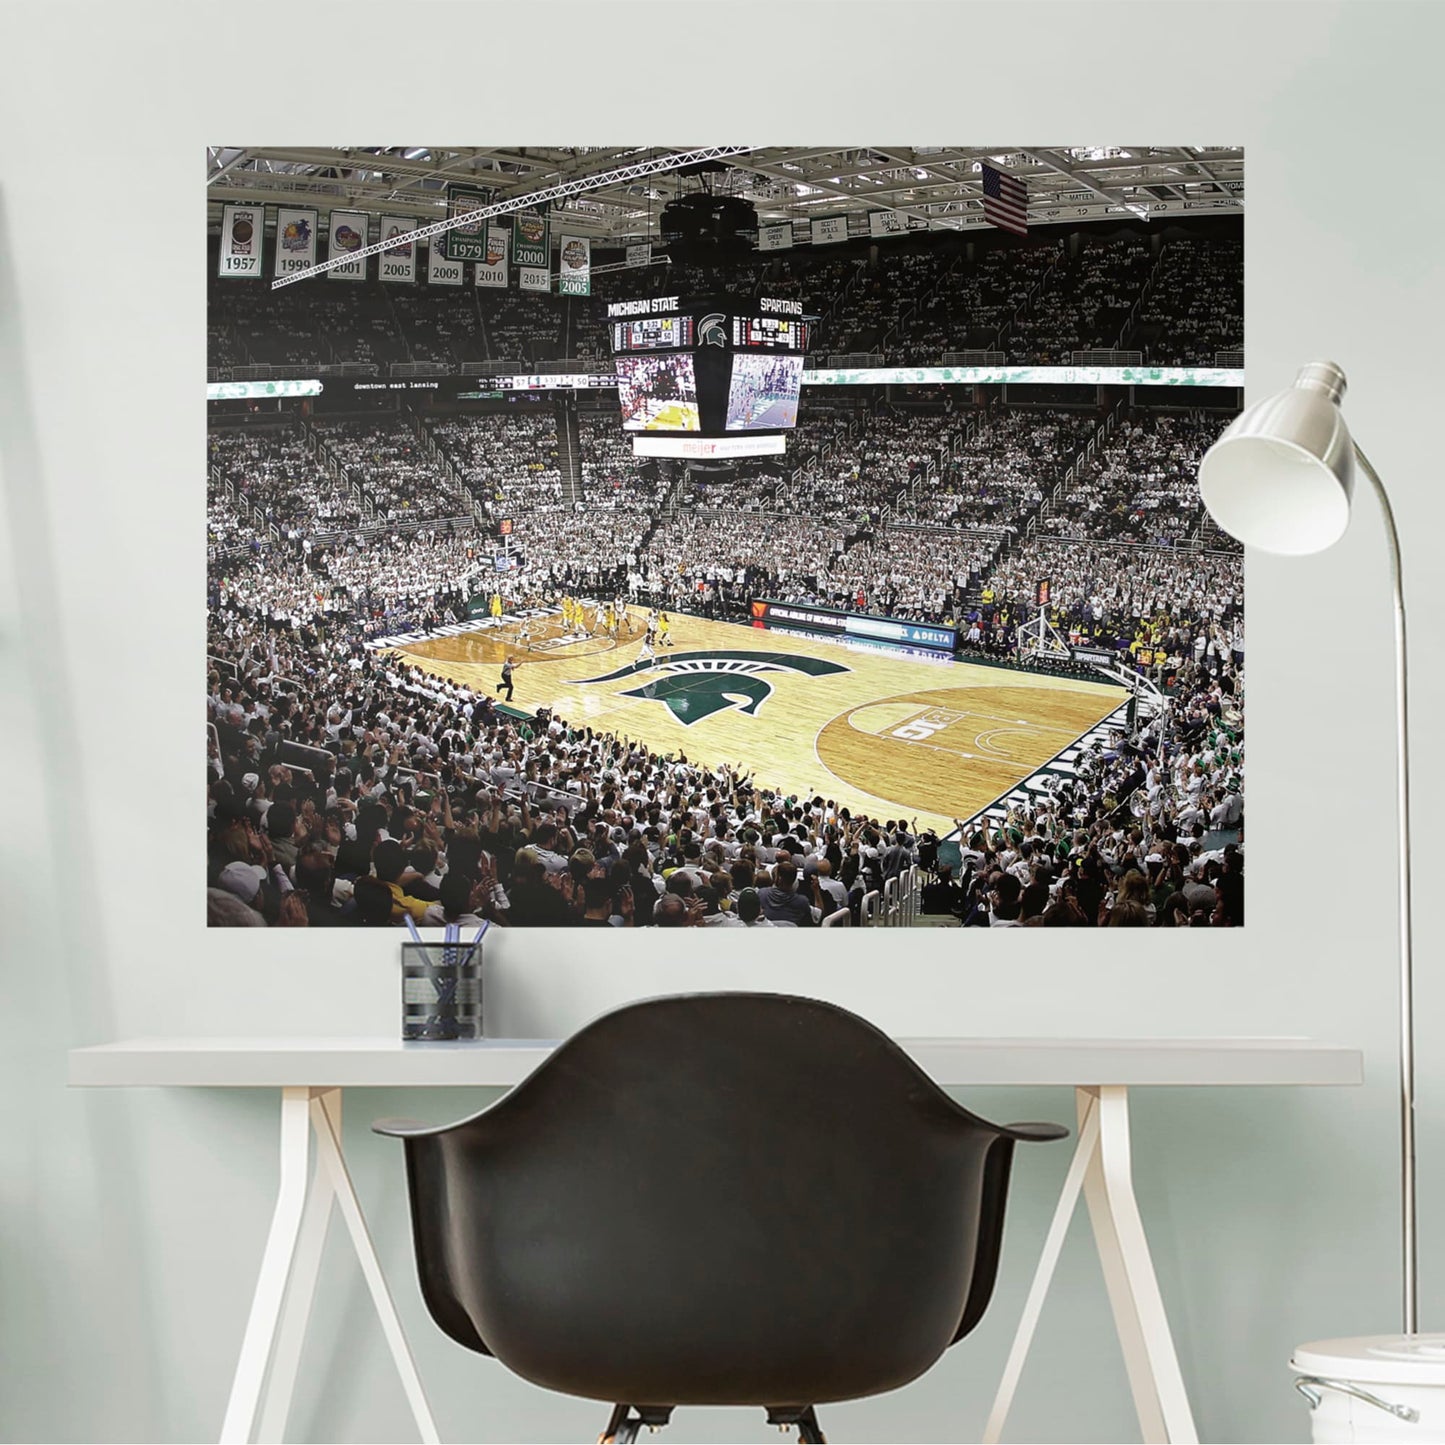 Michigan State U: Michigan State Spartans Breslin Center Corner View Mural        - Officially Licensed NCAA Removable Wall   Adhesive Decal